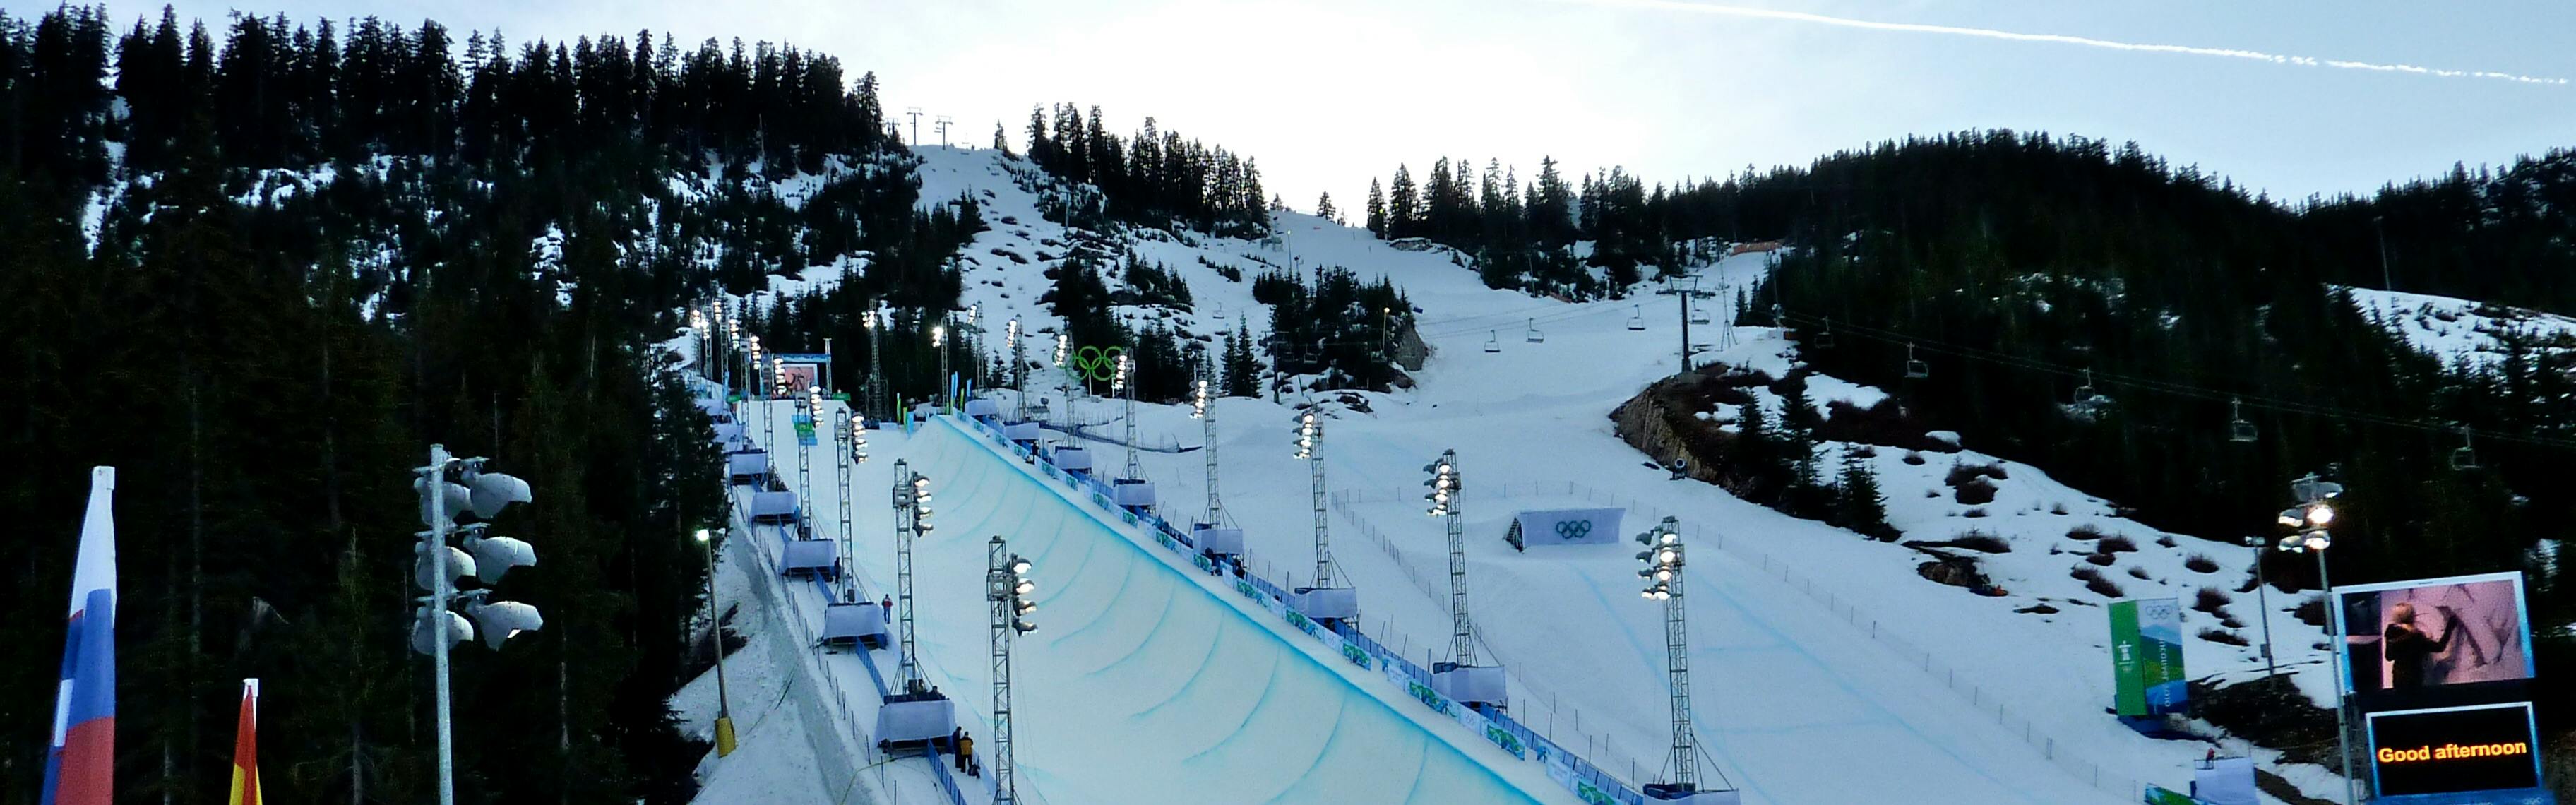 The Olympic halfpipe in Vancouver.